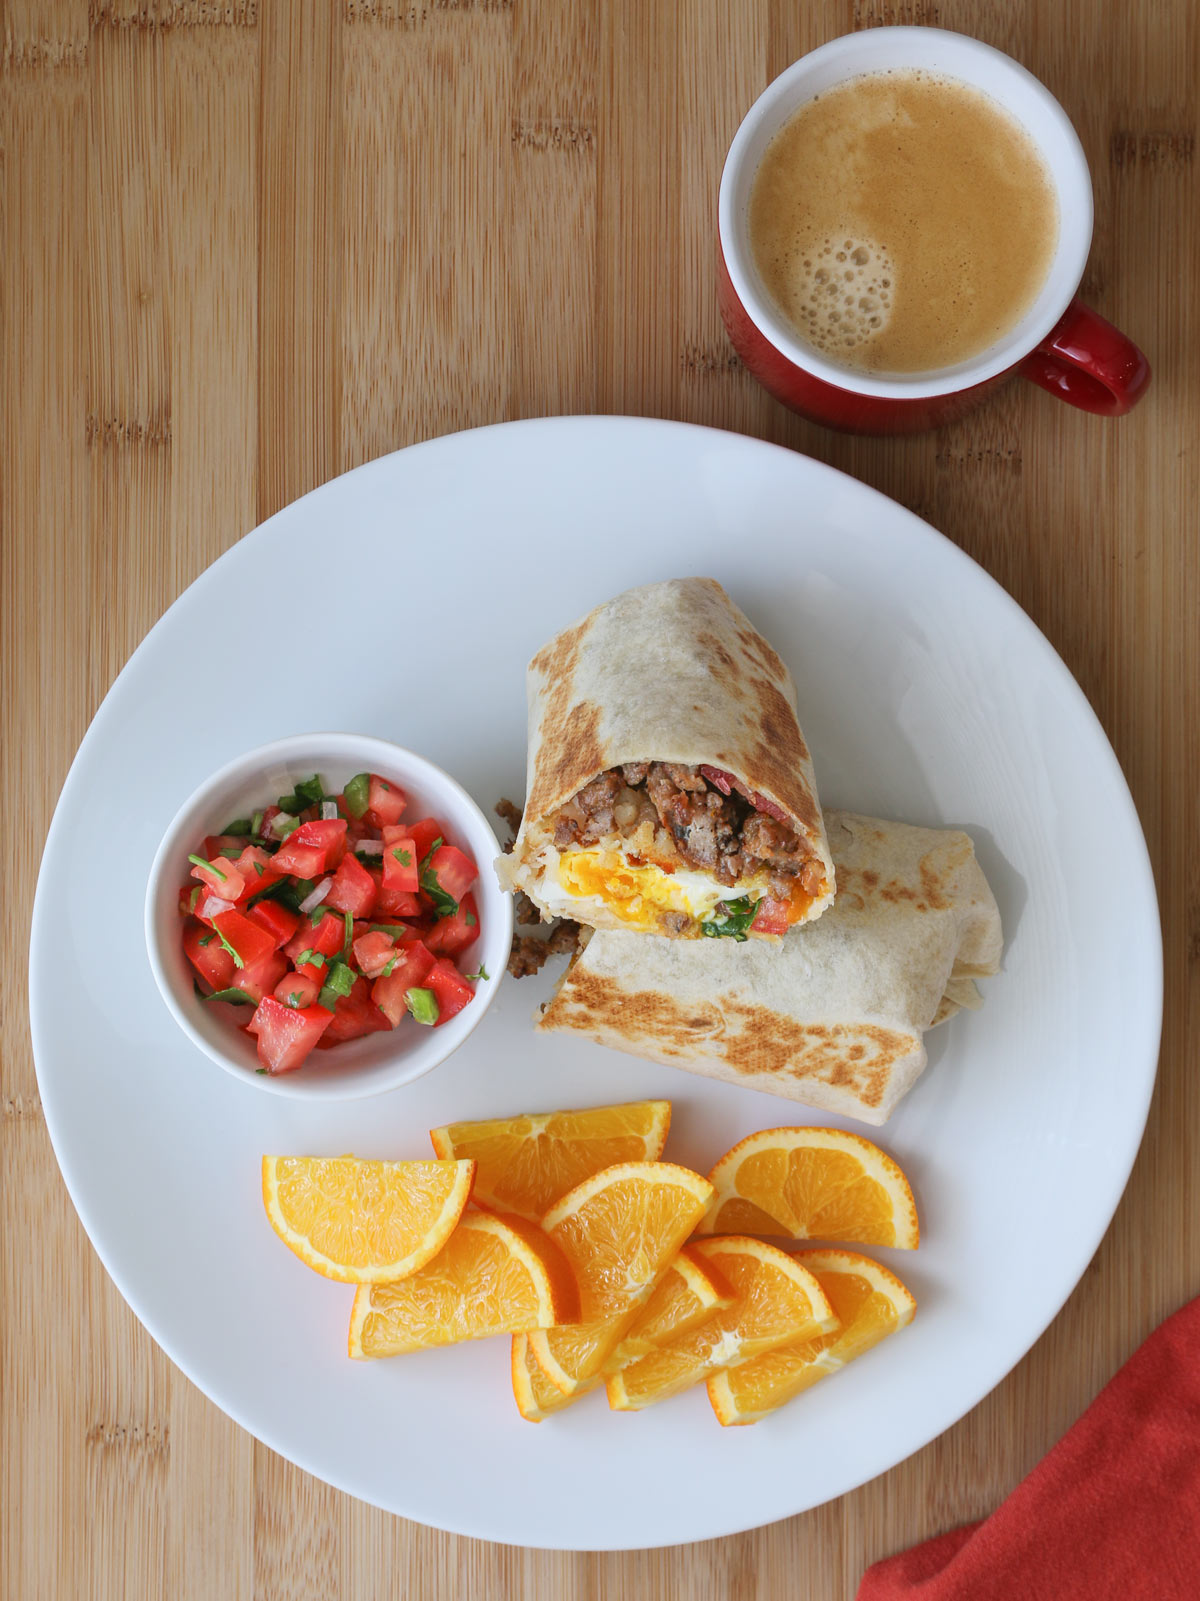 breakfast plate with burrito cut in half with orange slices and bowl of pico, cup of coffee nearby.